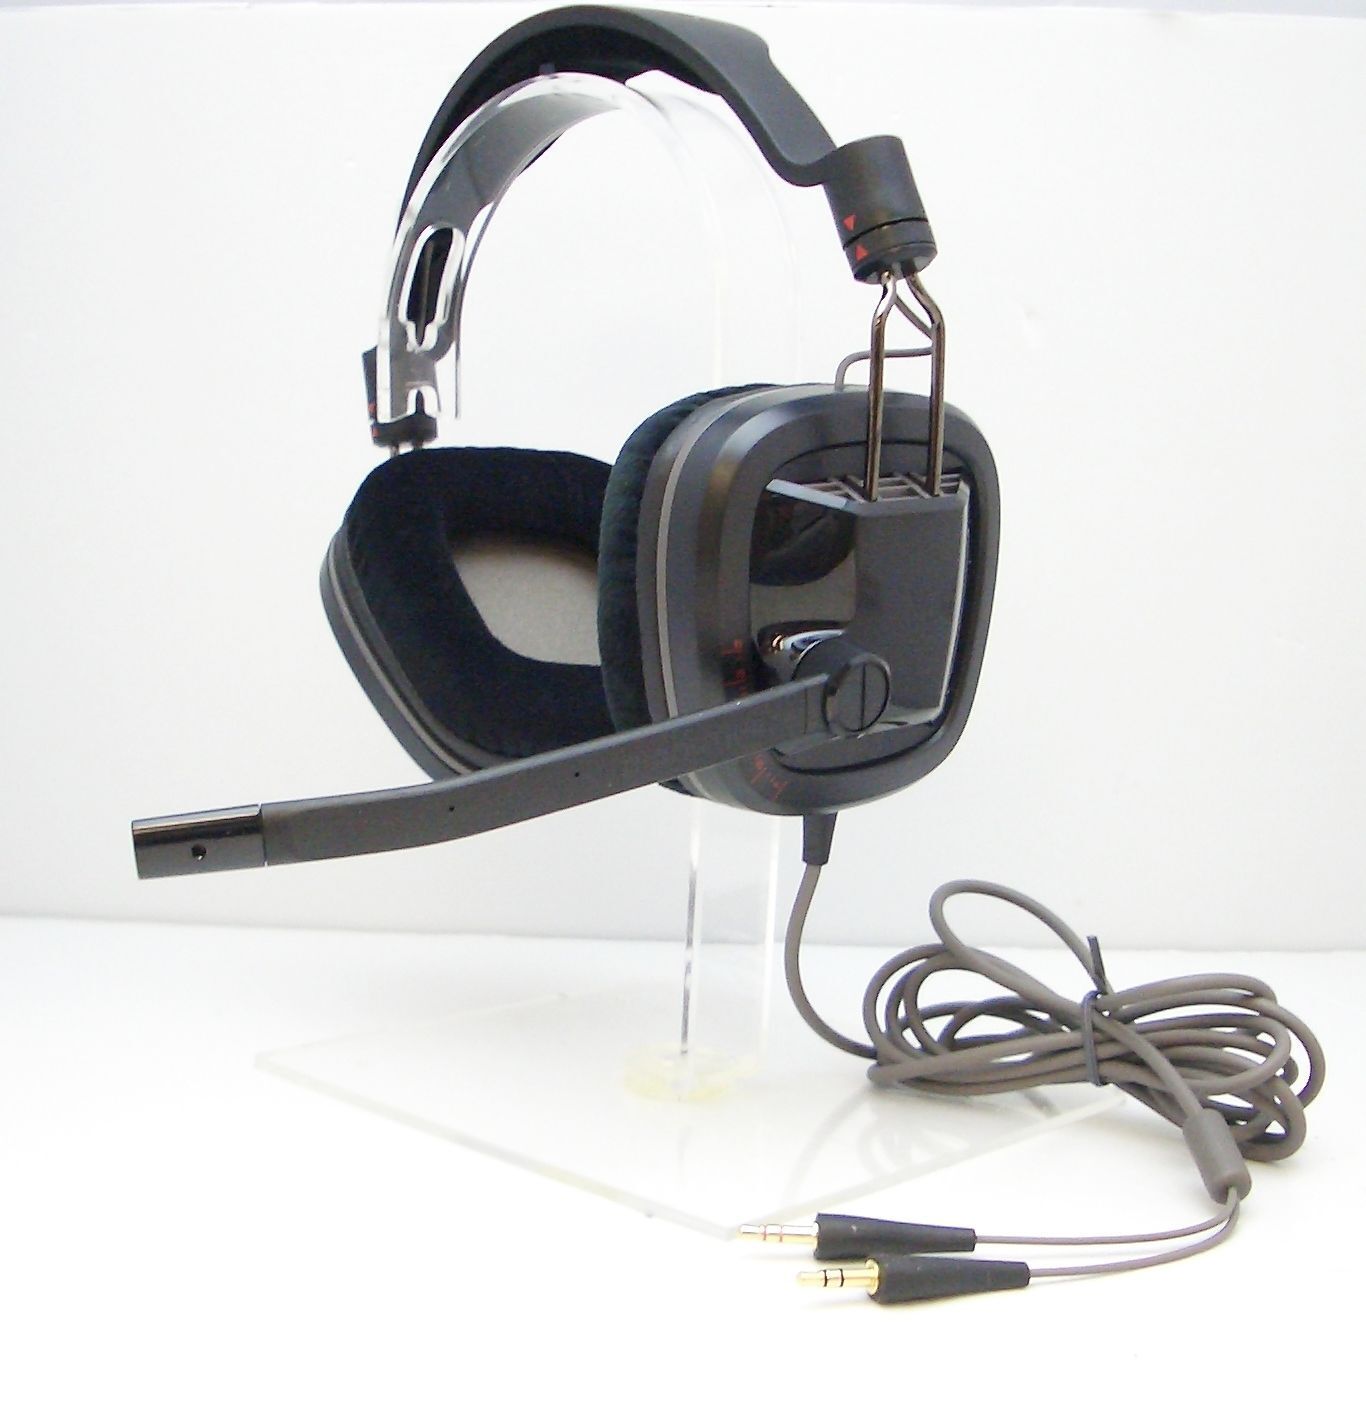 Plantronics Gamecom 380 Stereo Headband PC Gaming Headset with 40mm Speakers